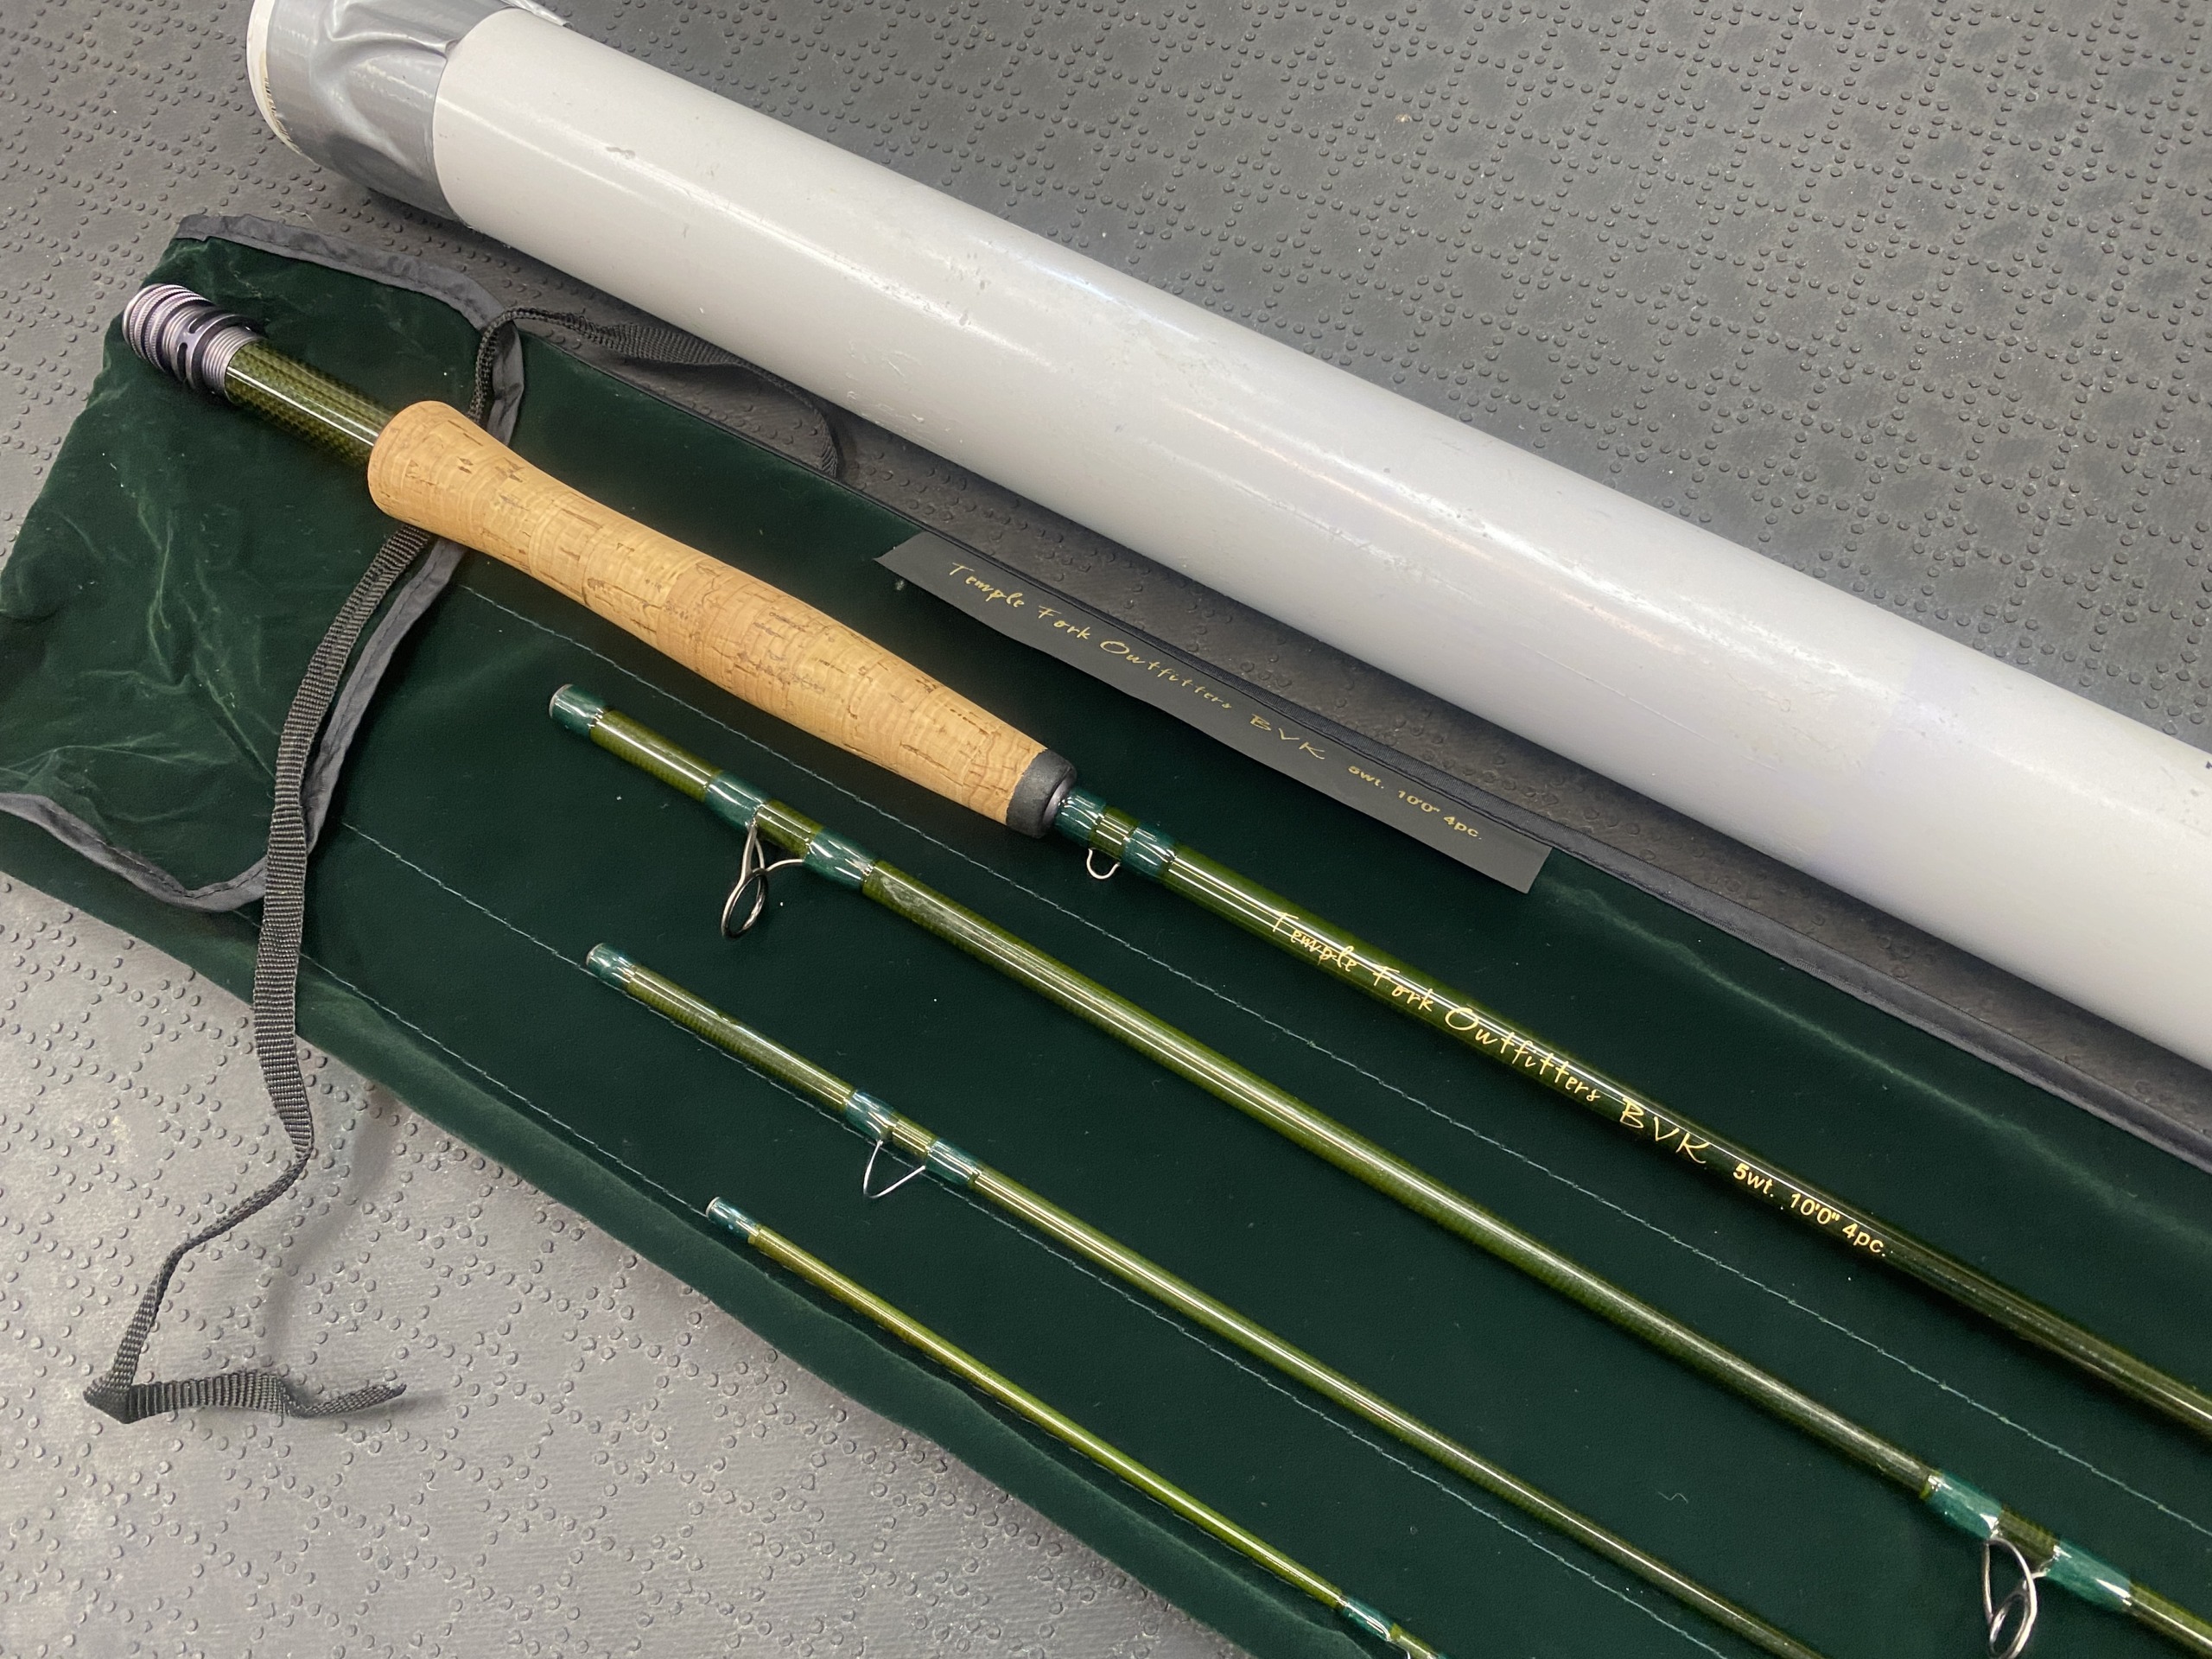 https://thefirstcast.ca/wp-content/uploads/2021/08/TFO-Temple-Fork-Outfitters-BVK-10-Foot-5-Weight-4-Piece-Fly-Rod-A-scaled.jpg